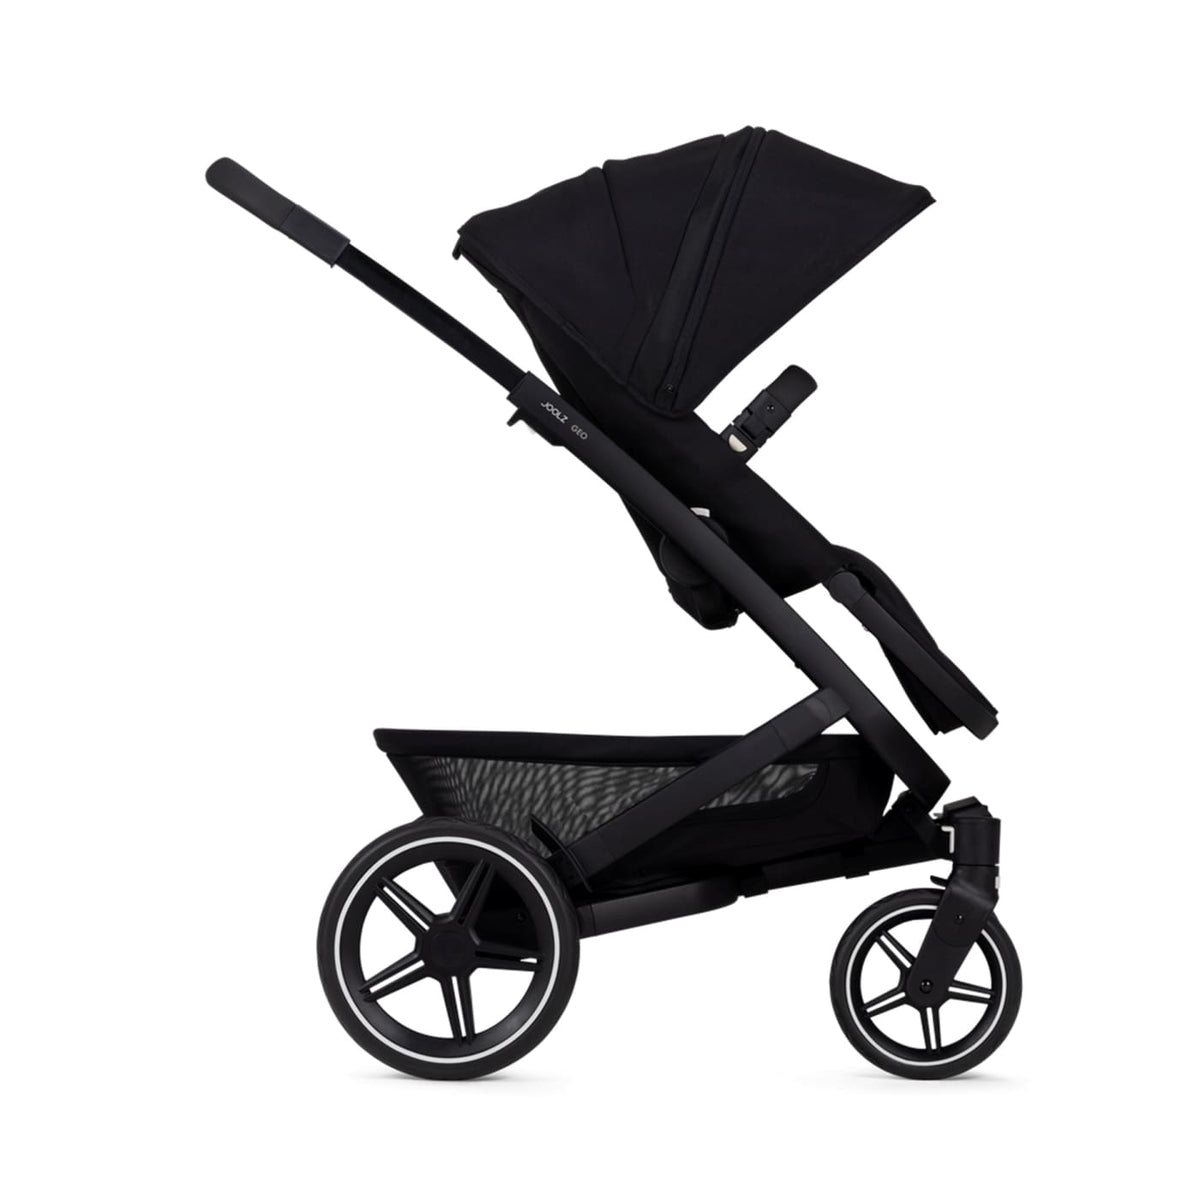 Joolz Geo3 Duo Stroller - Brilliant Black (1 Seat + 1 Carry Cot) - PRAMS &amp; STROLLERS - PACKAGES